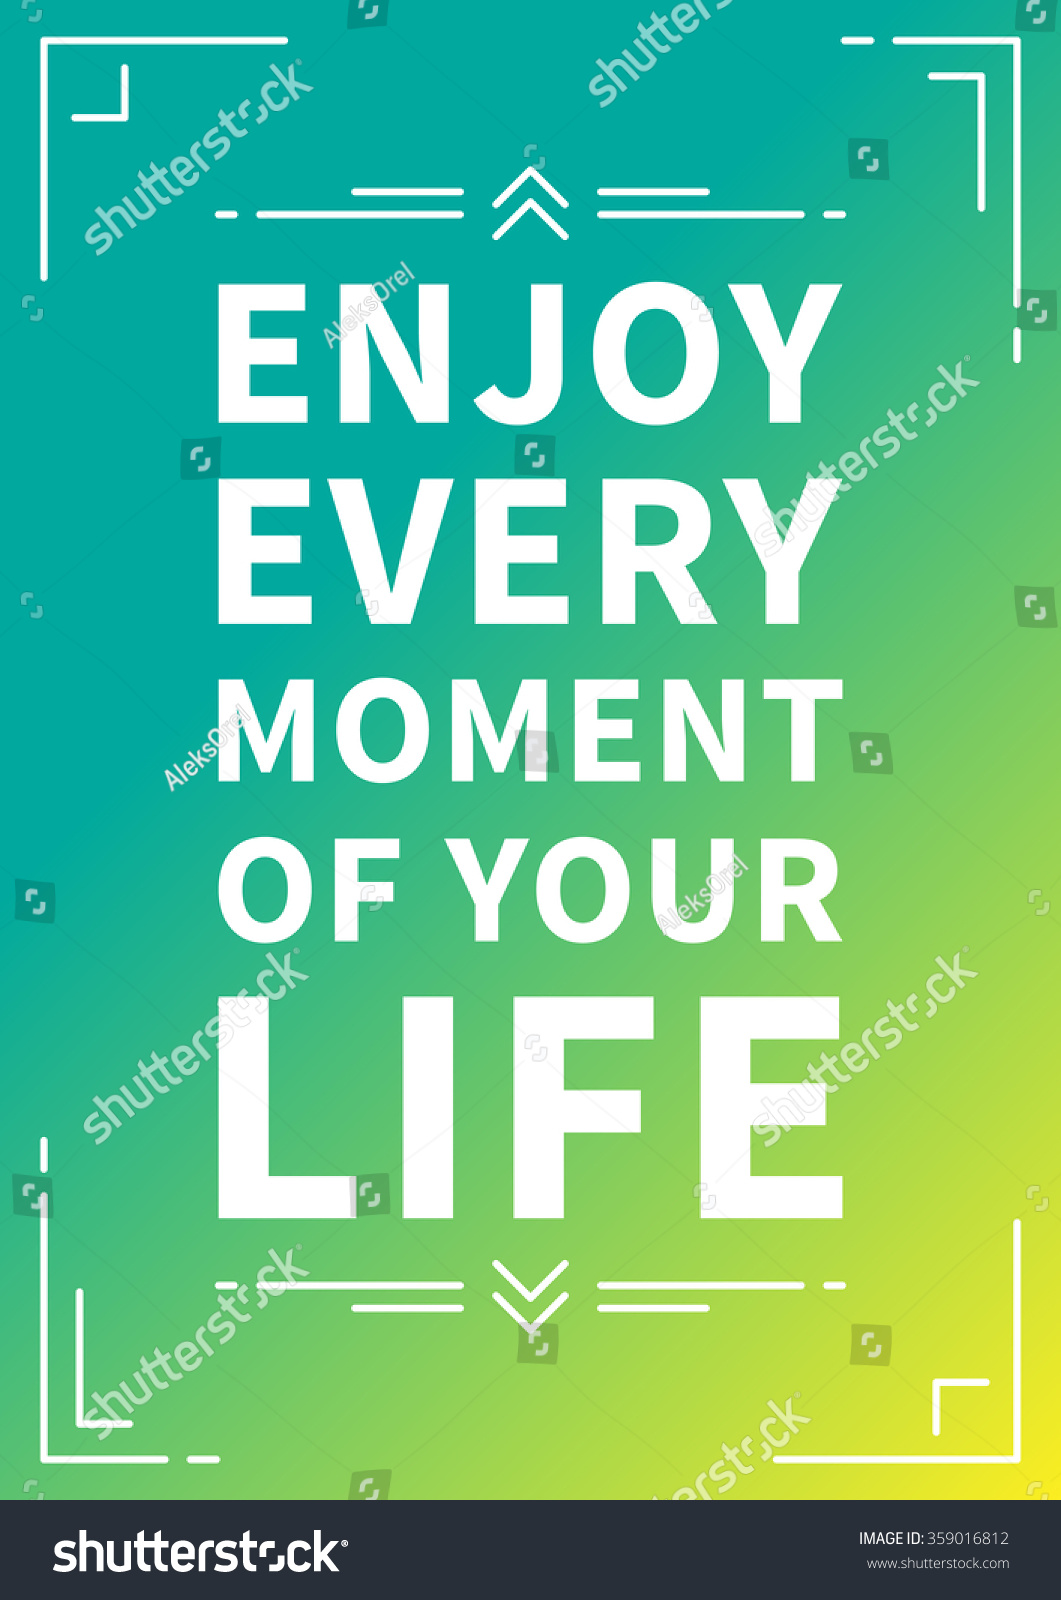 Enjoy every moment of your life Inspiring phrase Motivation quote Positive affirmation